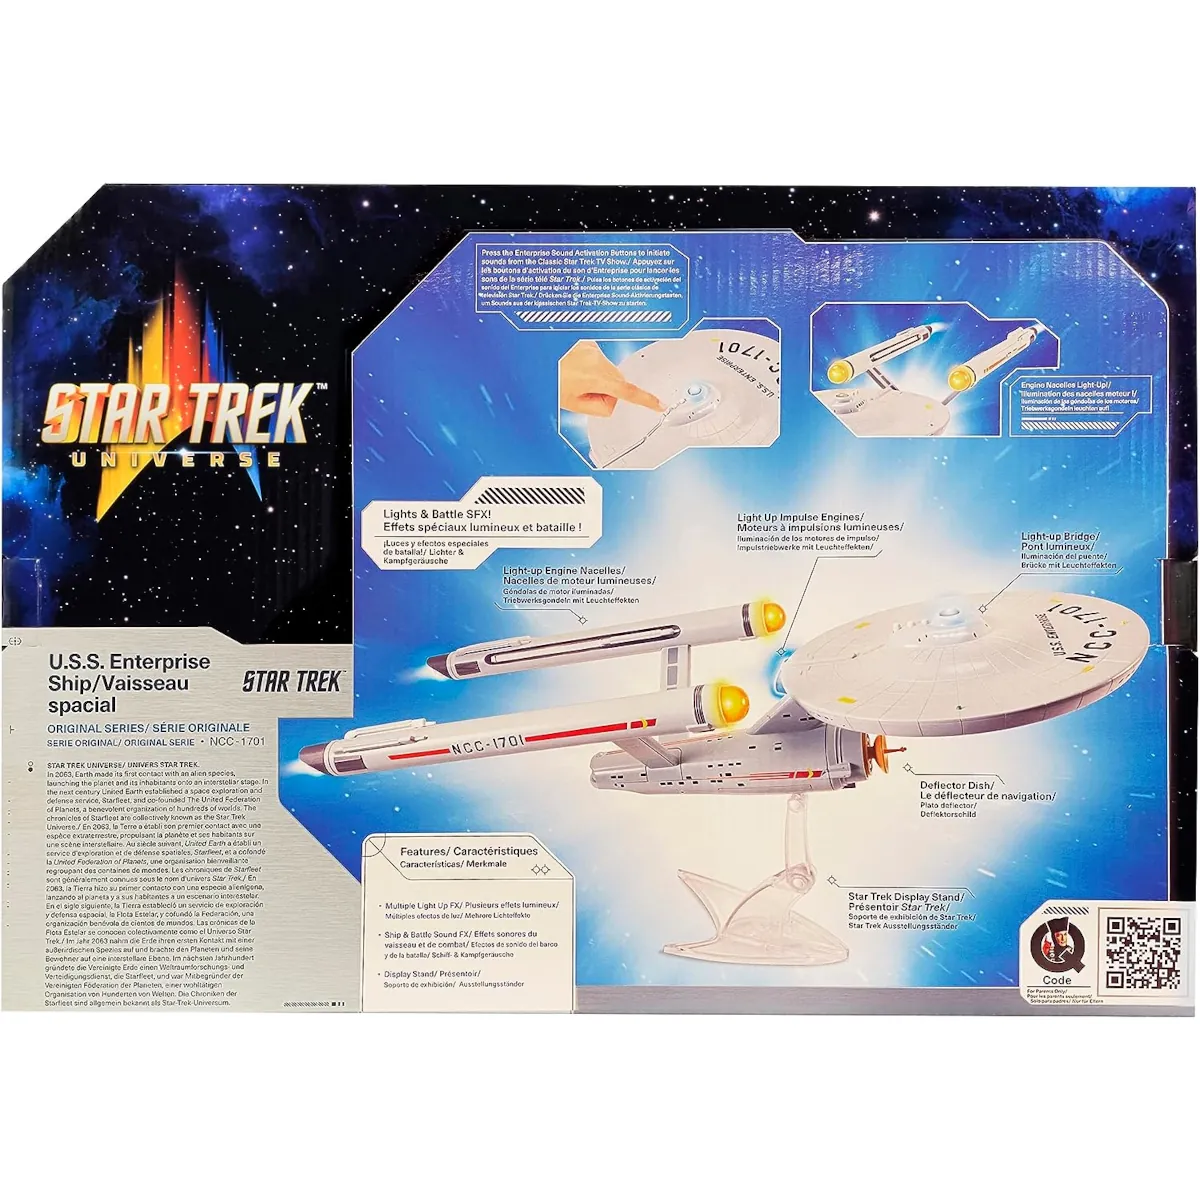 Bandai USS Enterprise NCC-1701 Star Trek Model With Lights Sounds And Display Stand Box Back